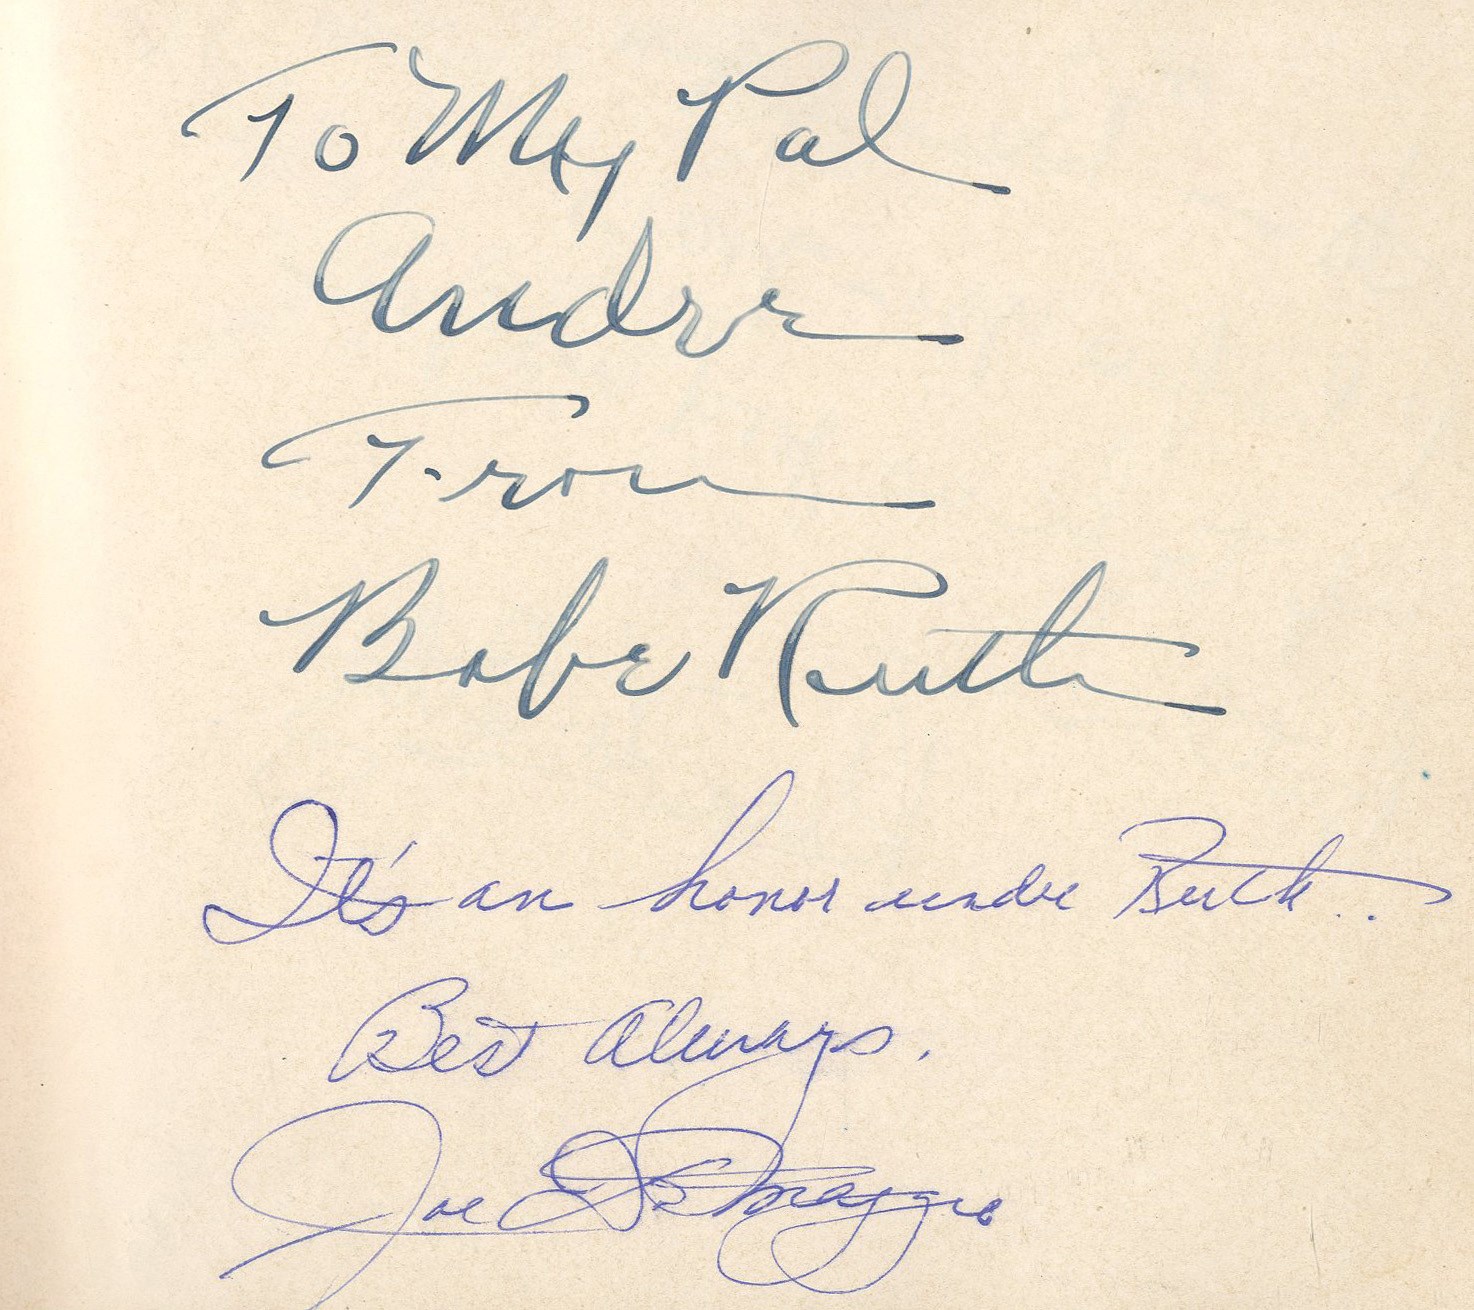 The Stork Club Autograph Book with Babe Ruth & Joe DiMaggio Together - A Who's Who of 1940s-50s Manhattan Elite (PSA)